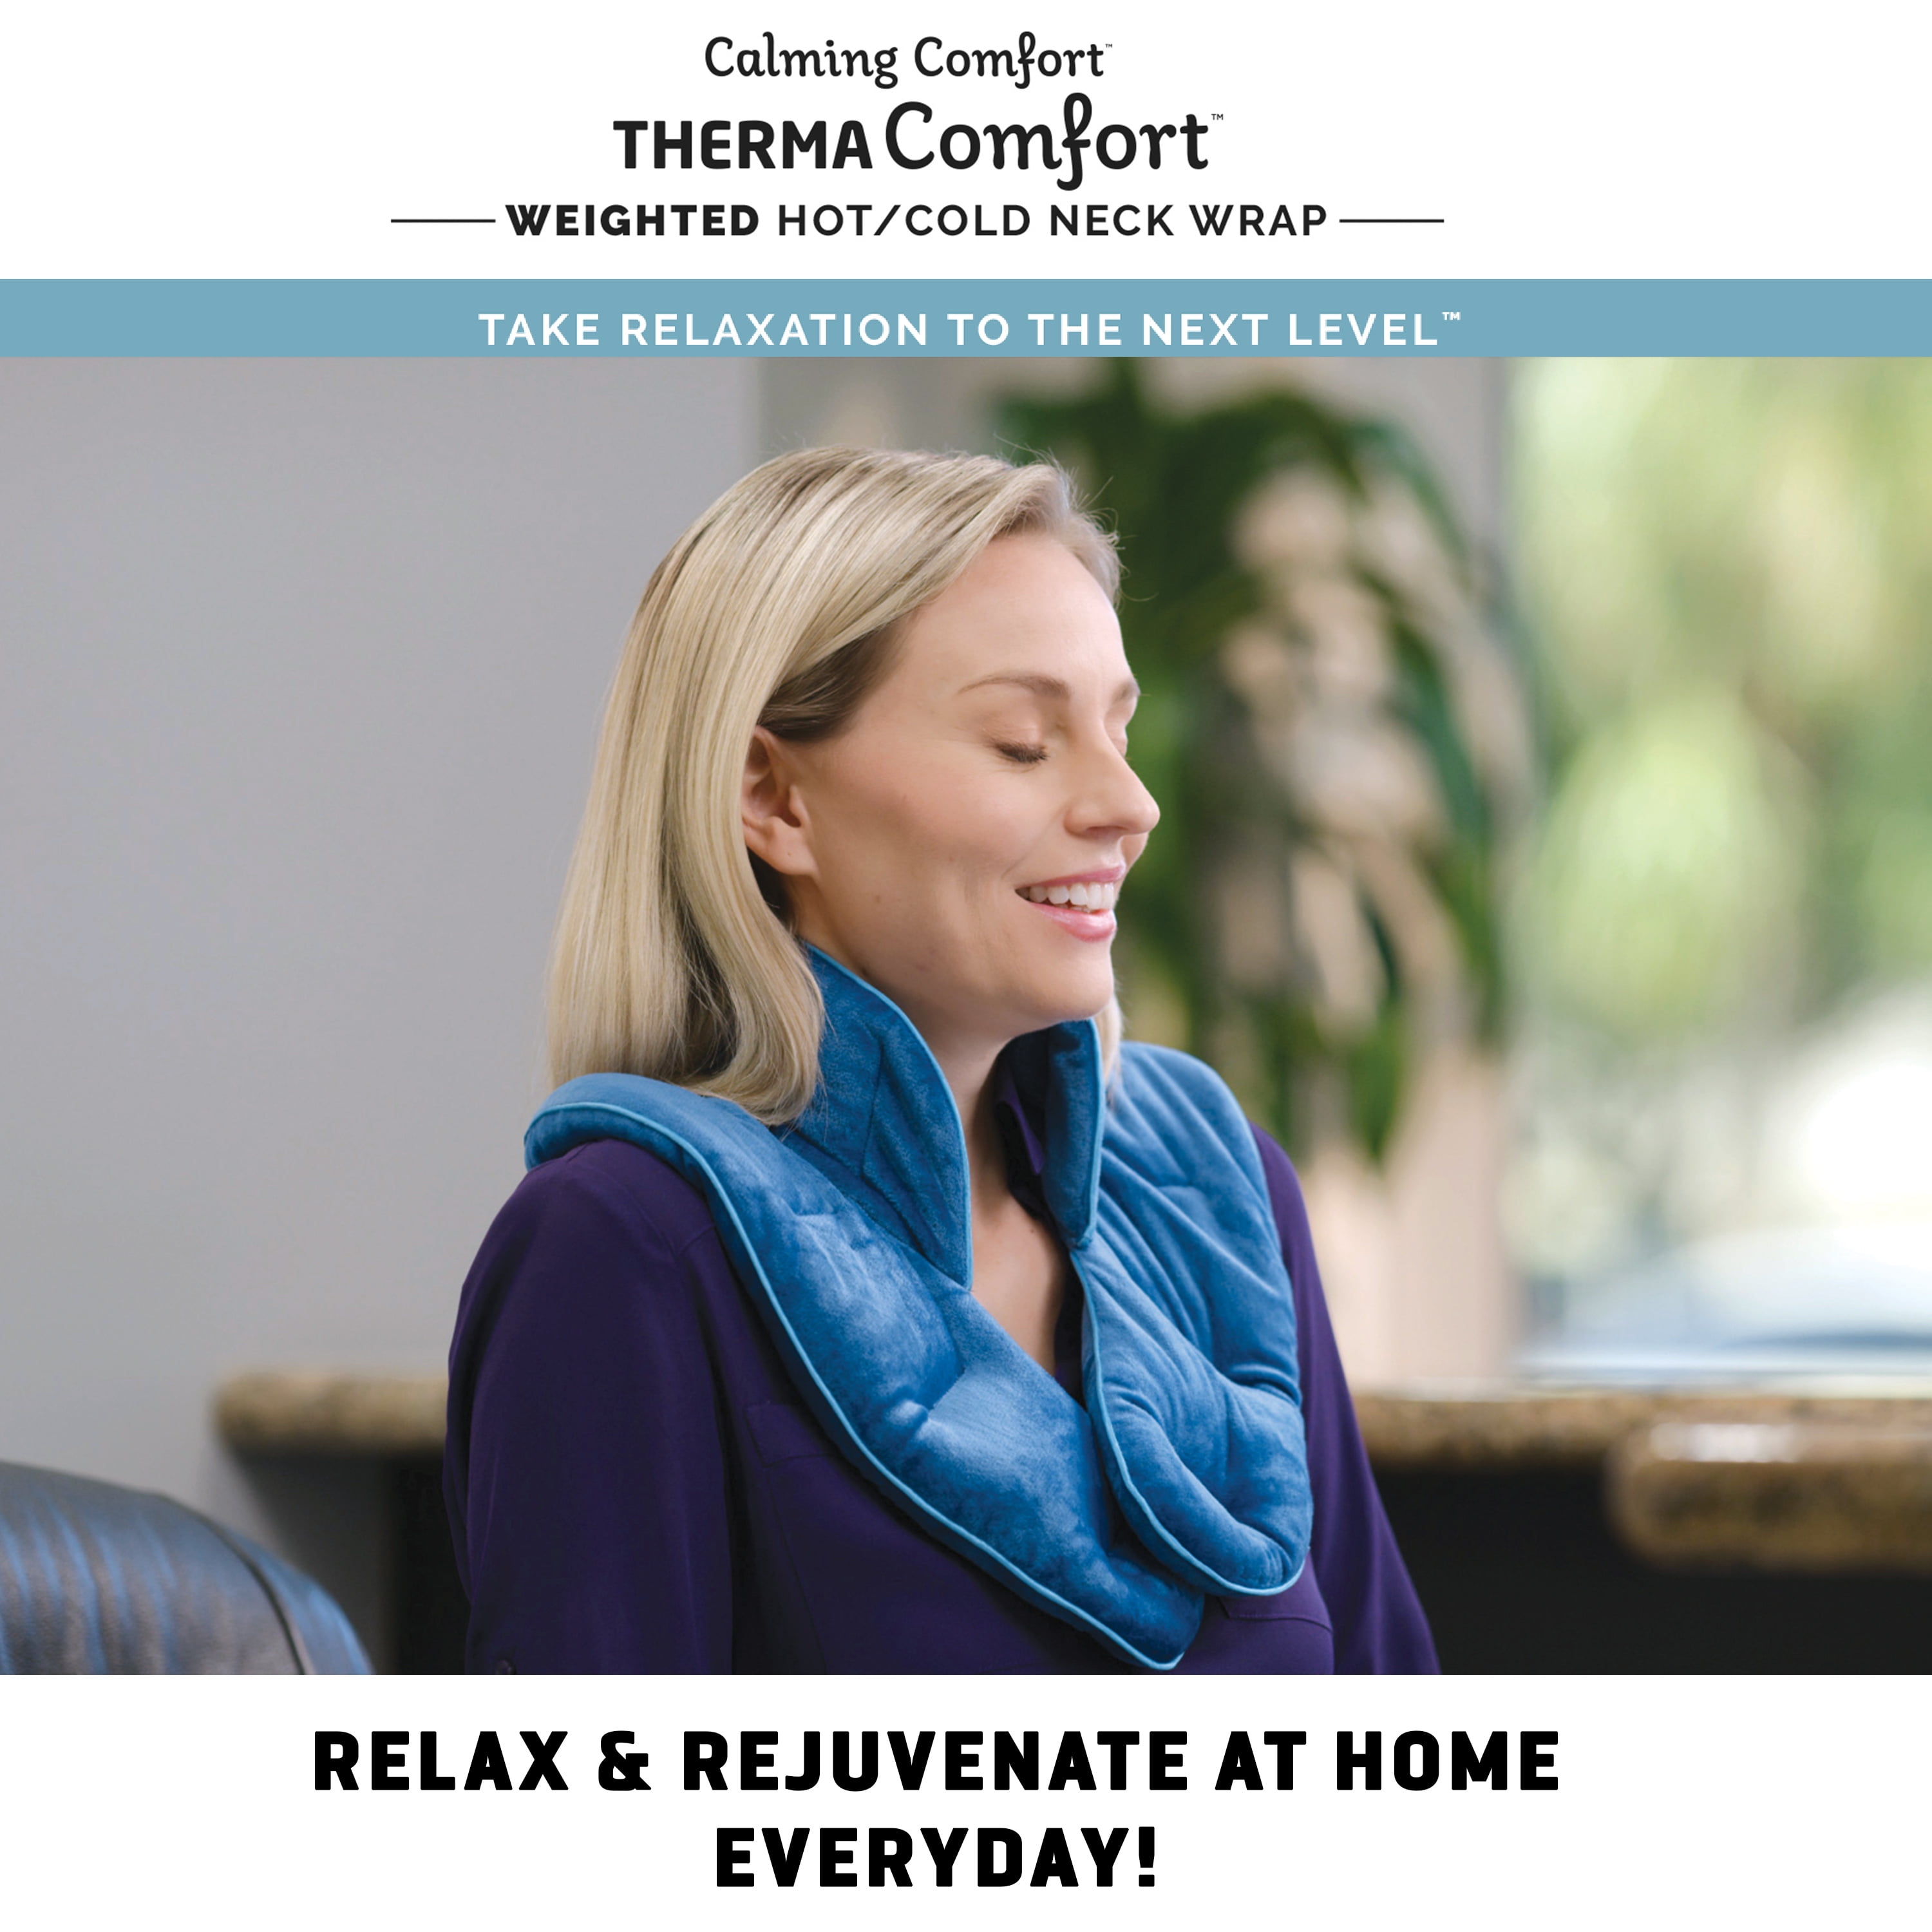 Calming Comfort ThermaComfort Neck Wrap, Weighted Heat Therapy Scarf, As Seen on TV